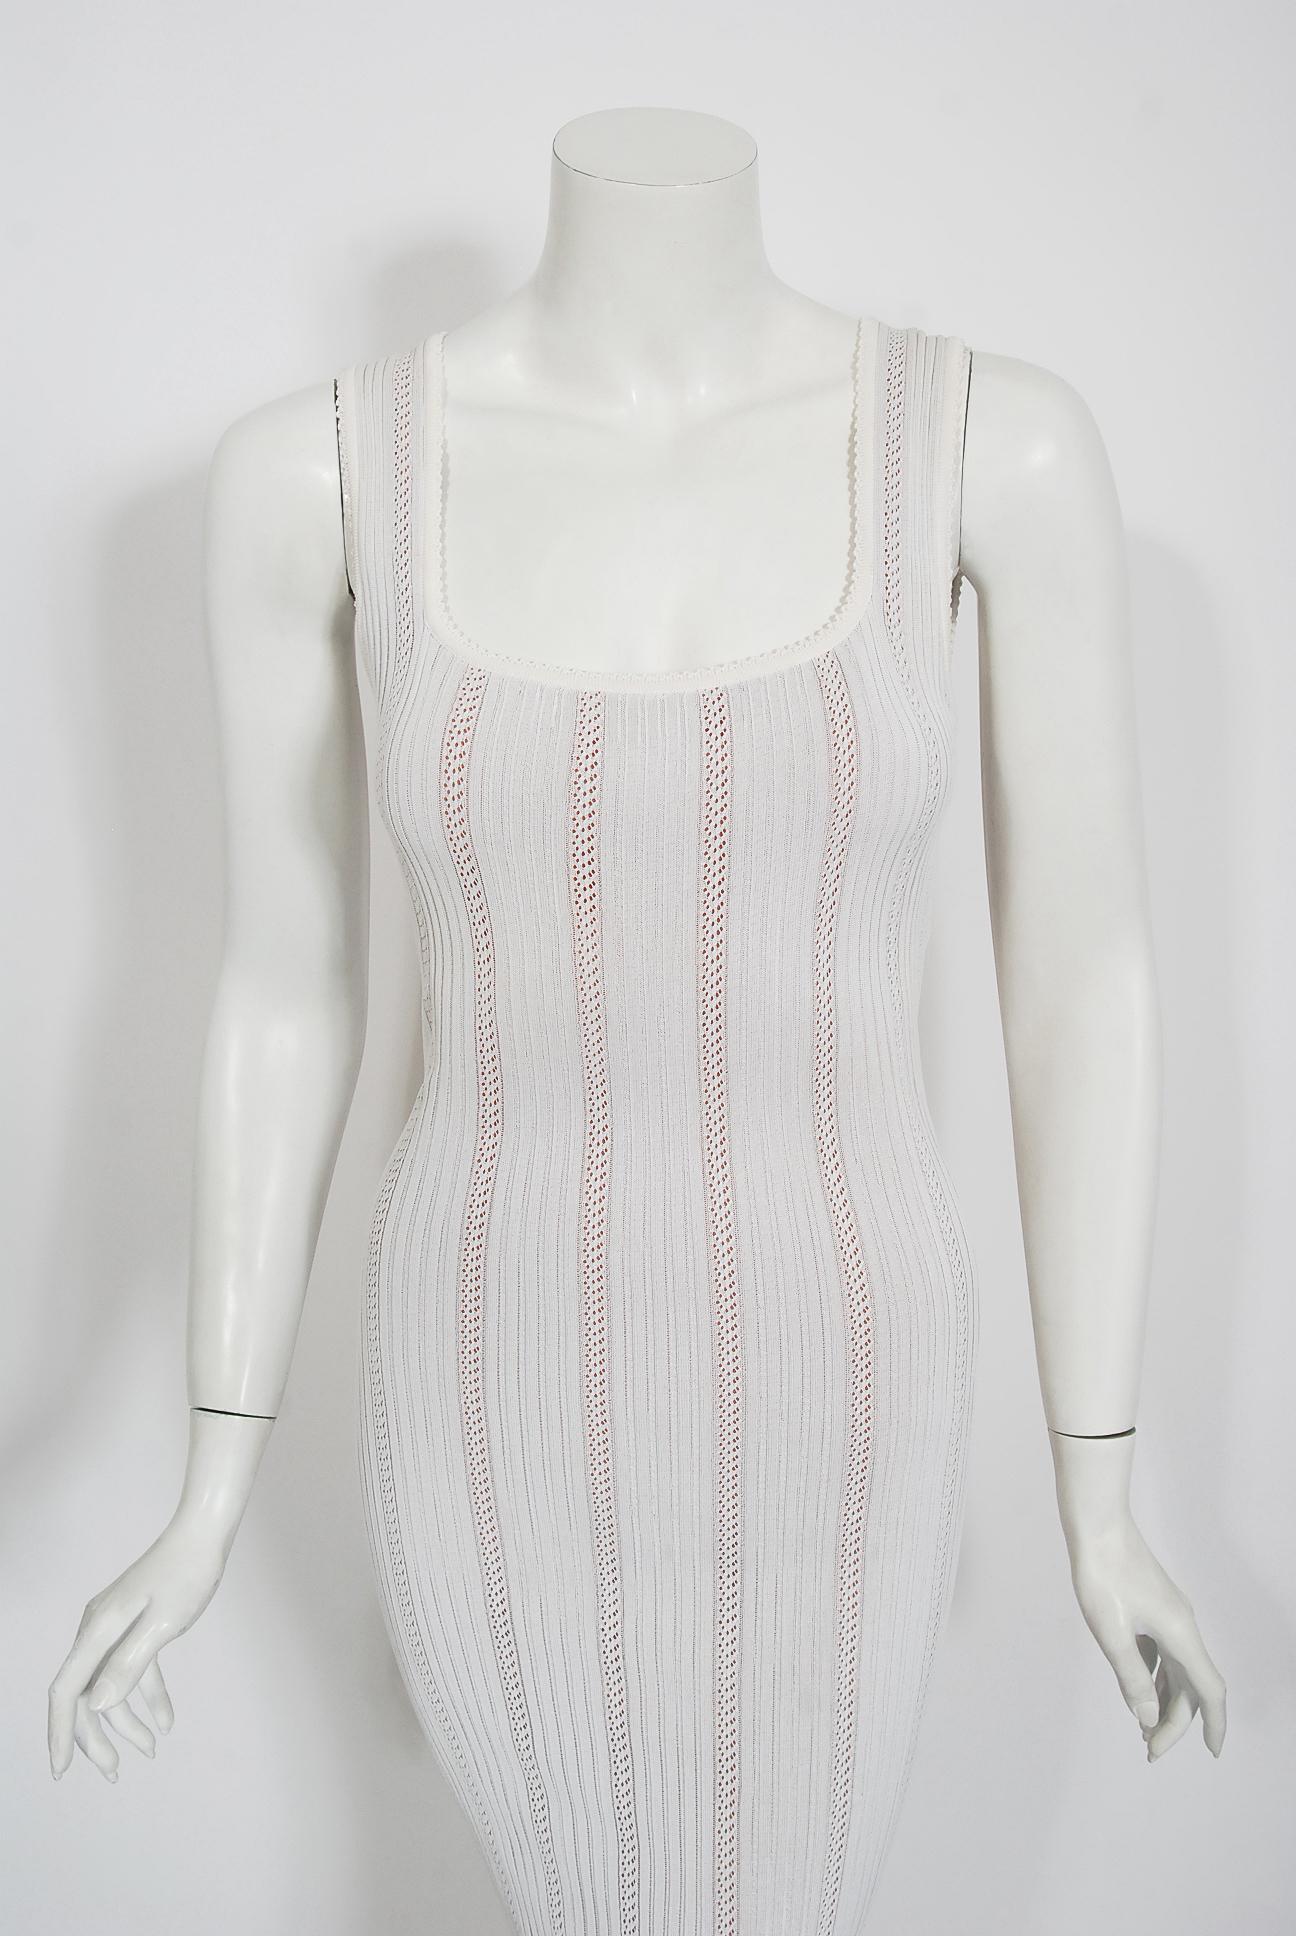 Iconic white patterned knit floor-length documented gown from Azzedine Alaia's 1996 Spring/Summer collection. In the 1980's when most of the fashion world was embracing sharp shouldered power dressing and baggy androgyny, Alaïa introduced the world